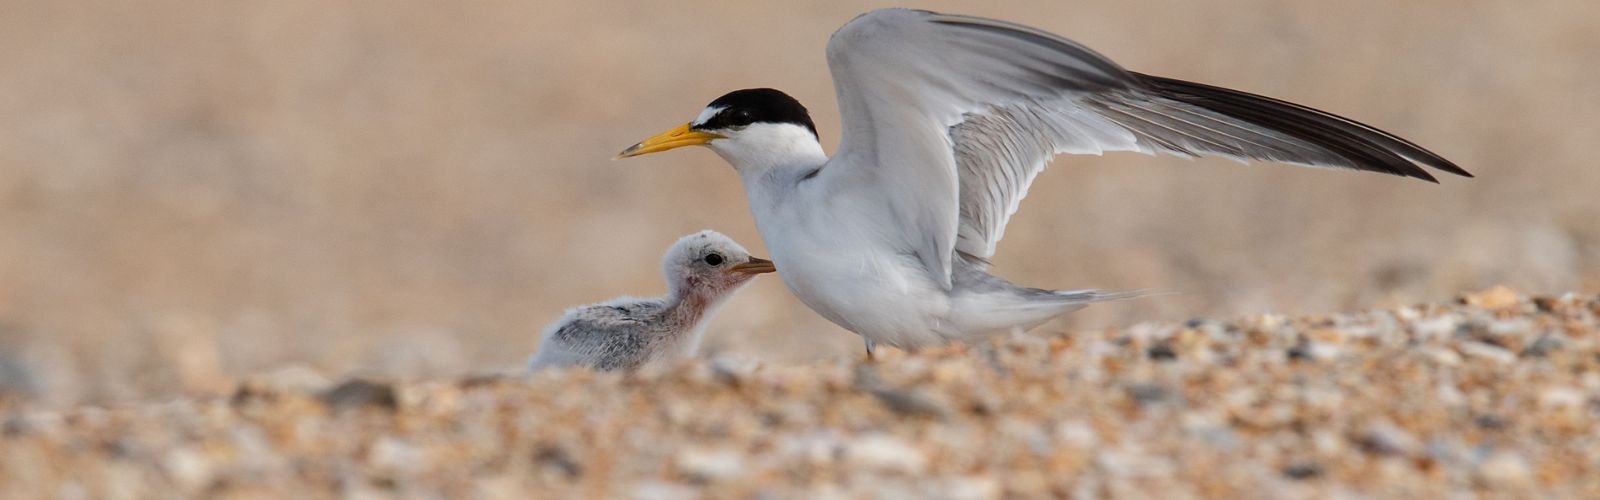 An adult least tern with raised wings shelters a chick on sand.